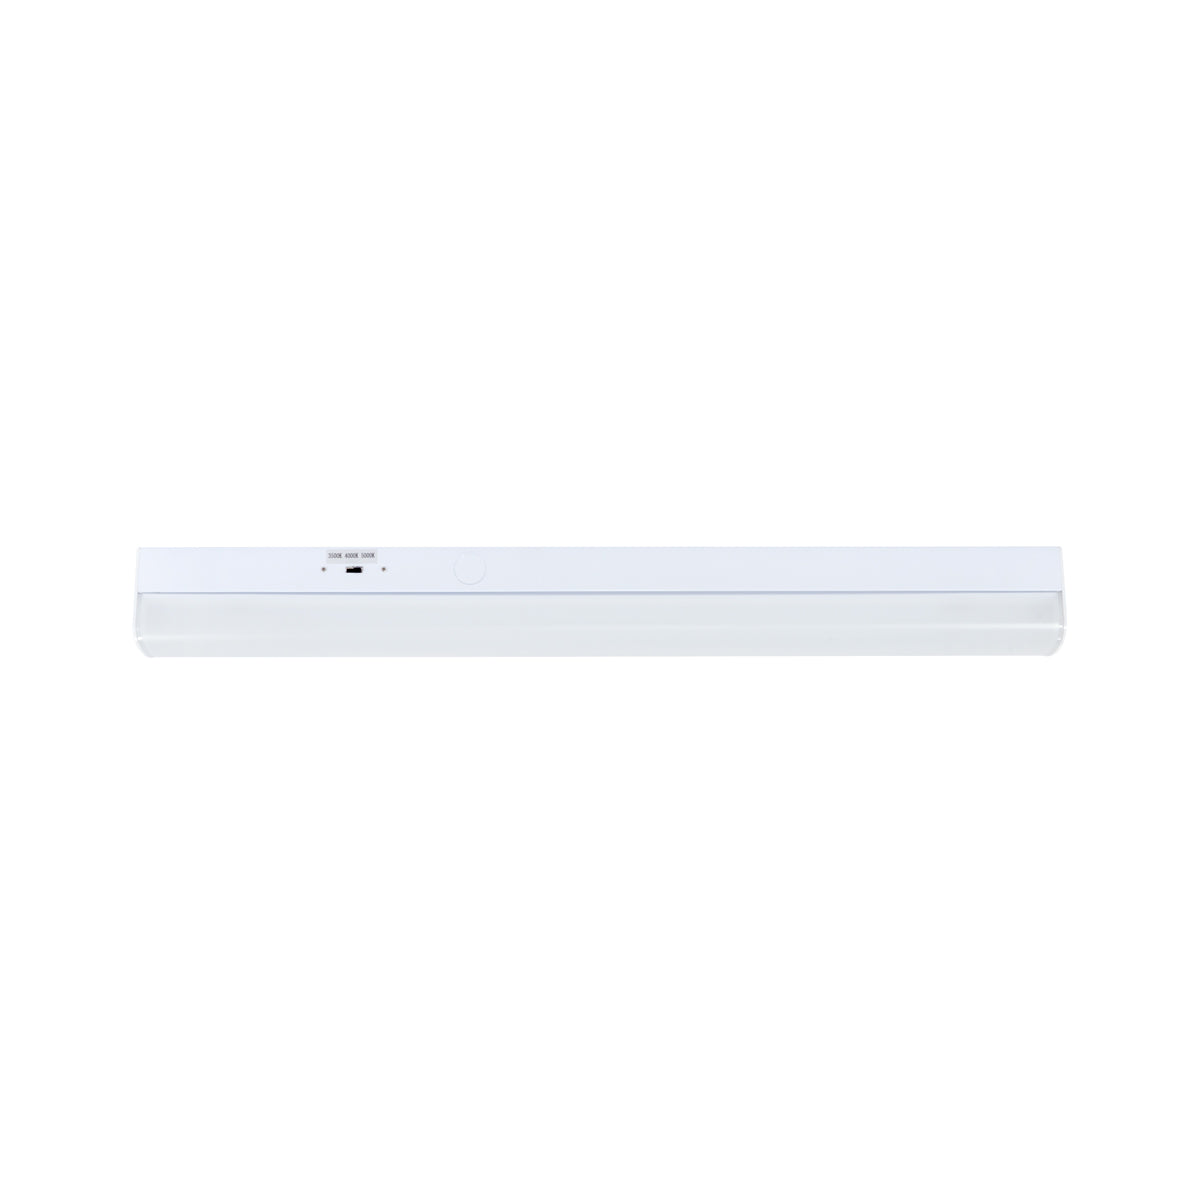 2FT LED Linear Fixture - Color & Wattage Selectable - Up to 3,250 Lumens